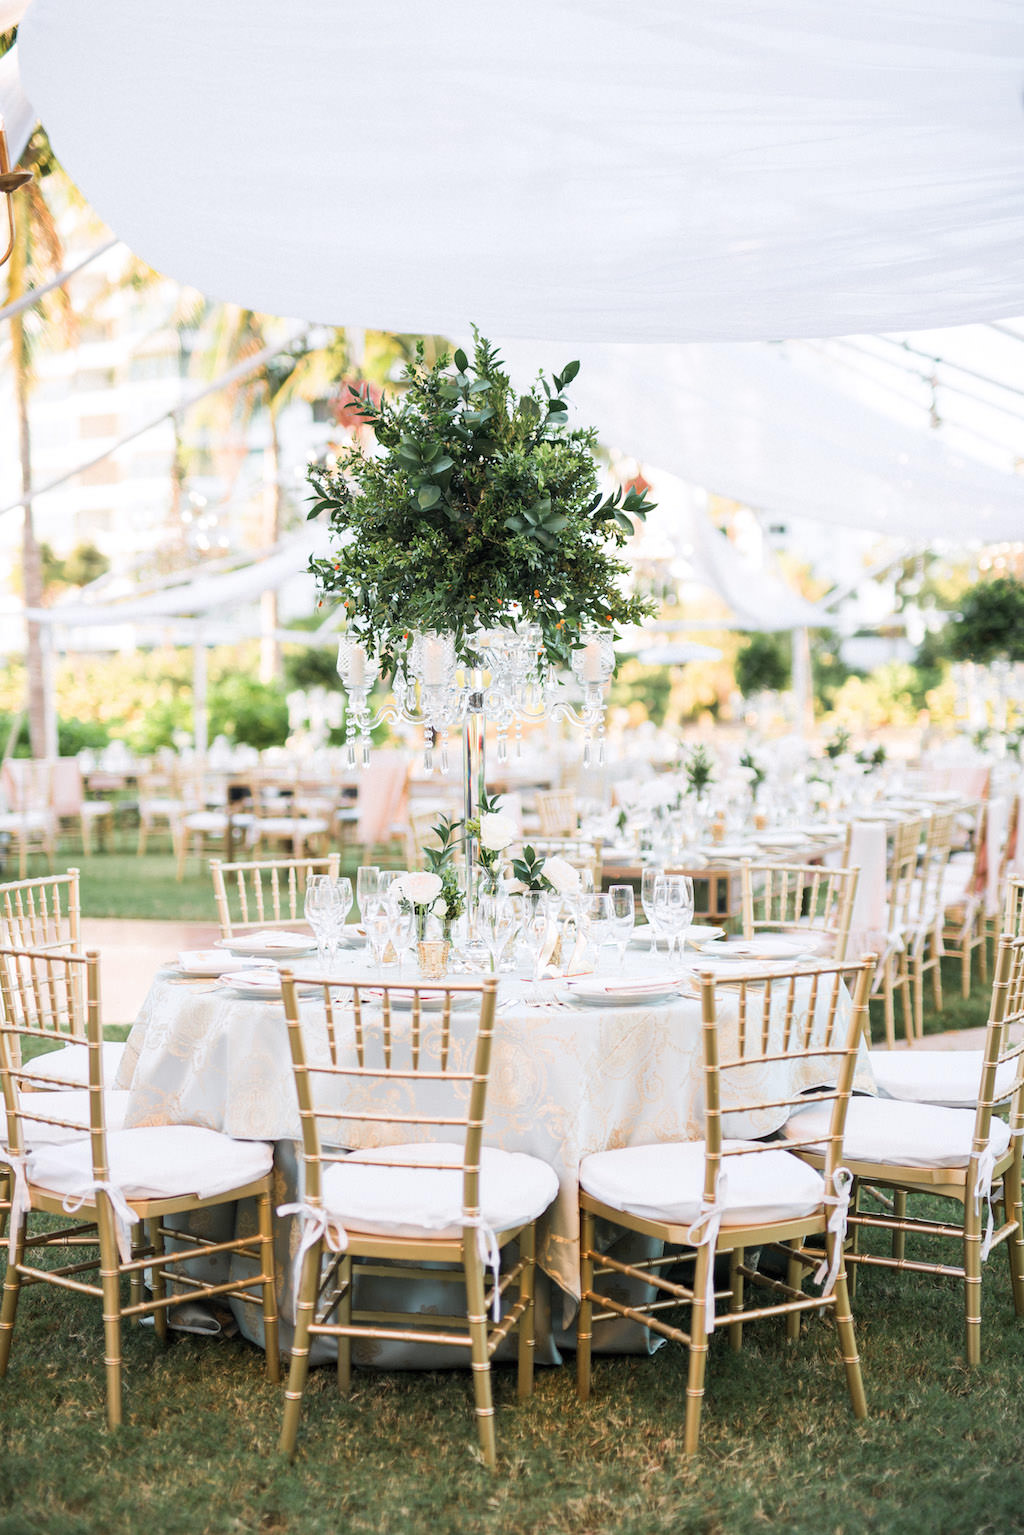 Elegant, Classic, Outdoor Tented Garden Inspired Wedding Decor and Reception, White and Gold Linen Circle Tables, Gold Chiavari Chairs, Tall Green Floral Centerpieces, The Ritz Carlton Sarasota | Tampa Bay Wedding Planner NK Weddings